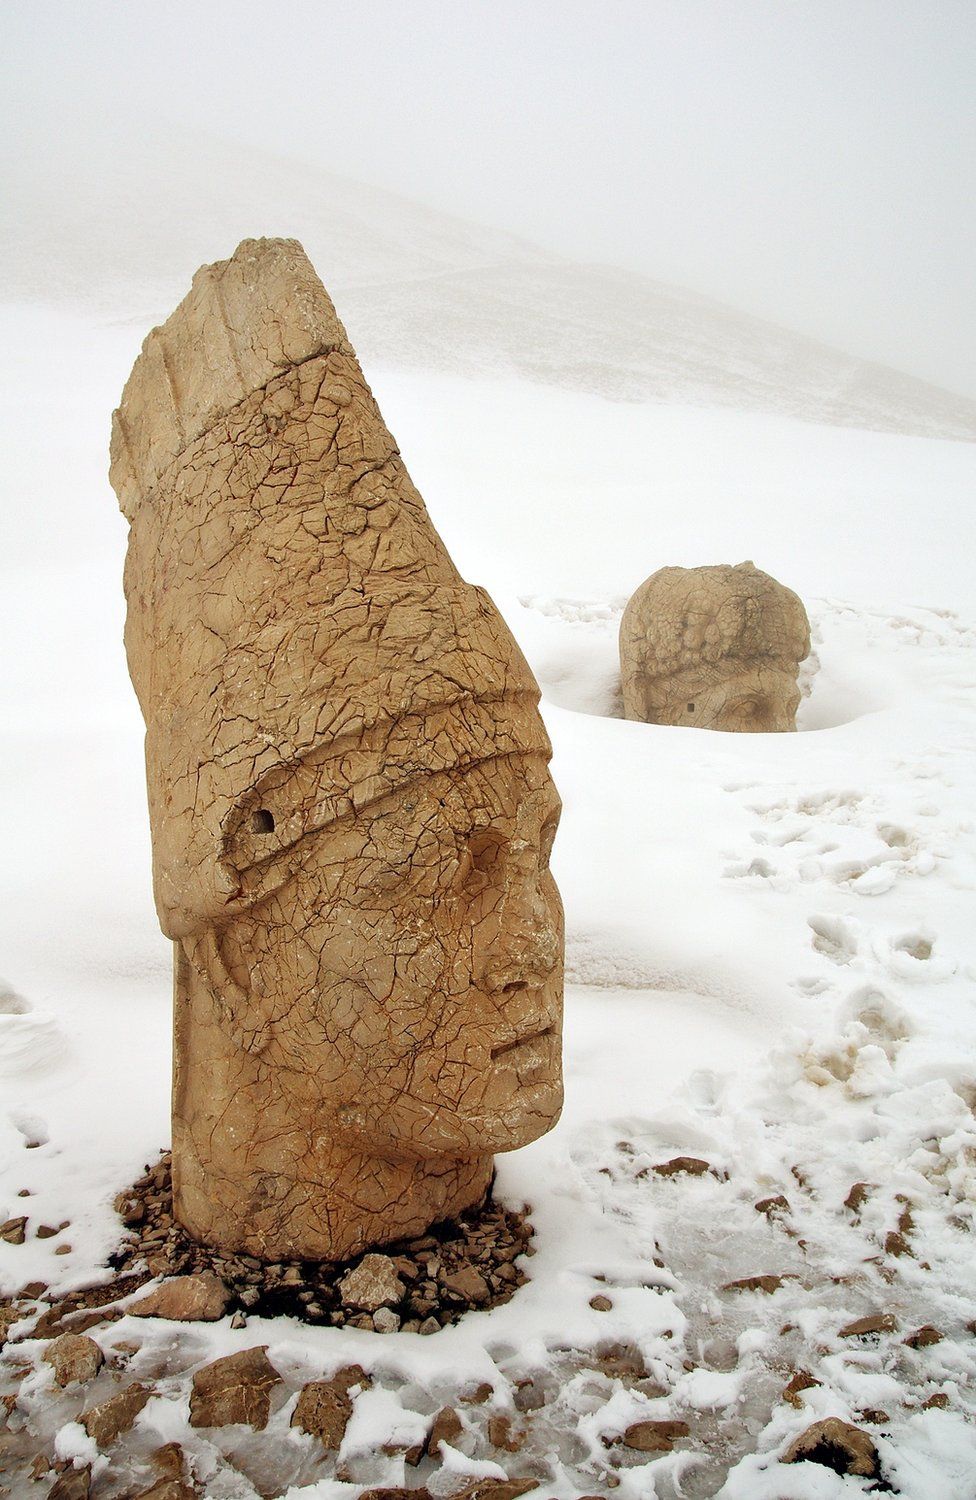 Two stone heads in snow, part of the remains of the Kingdom of Commagene in Turkey